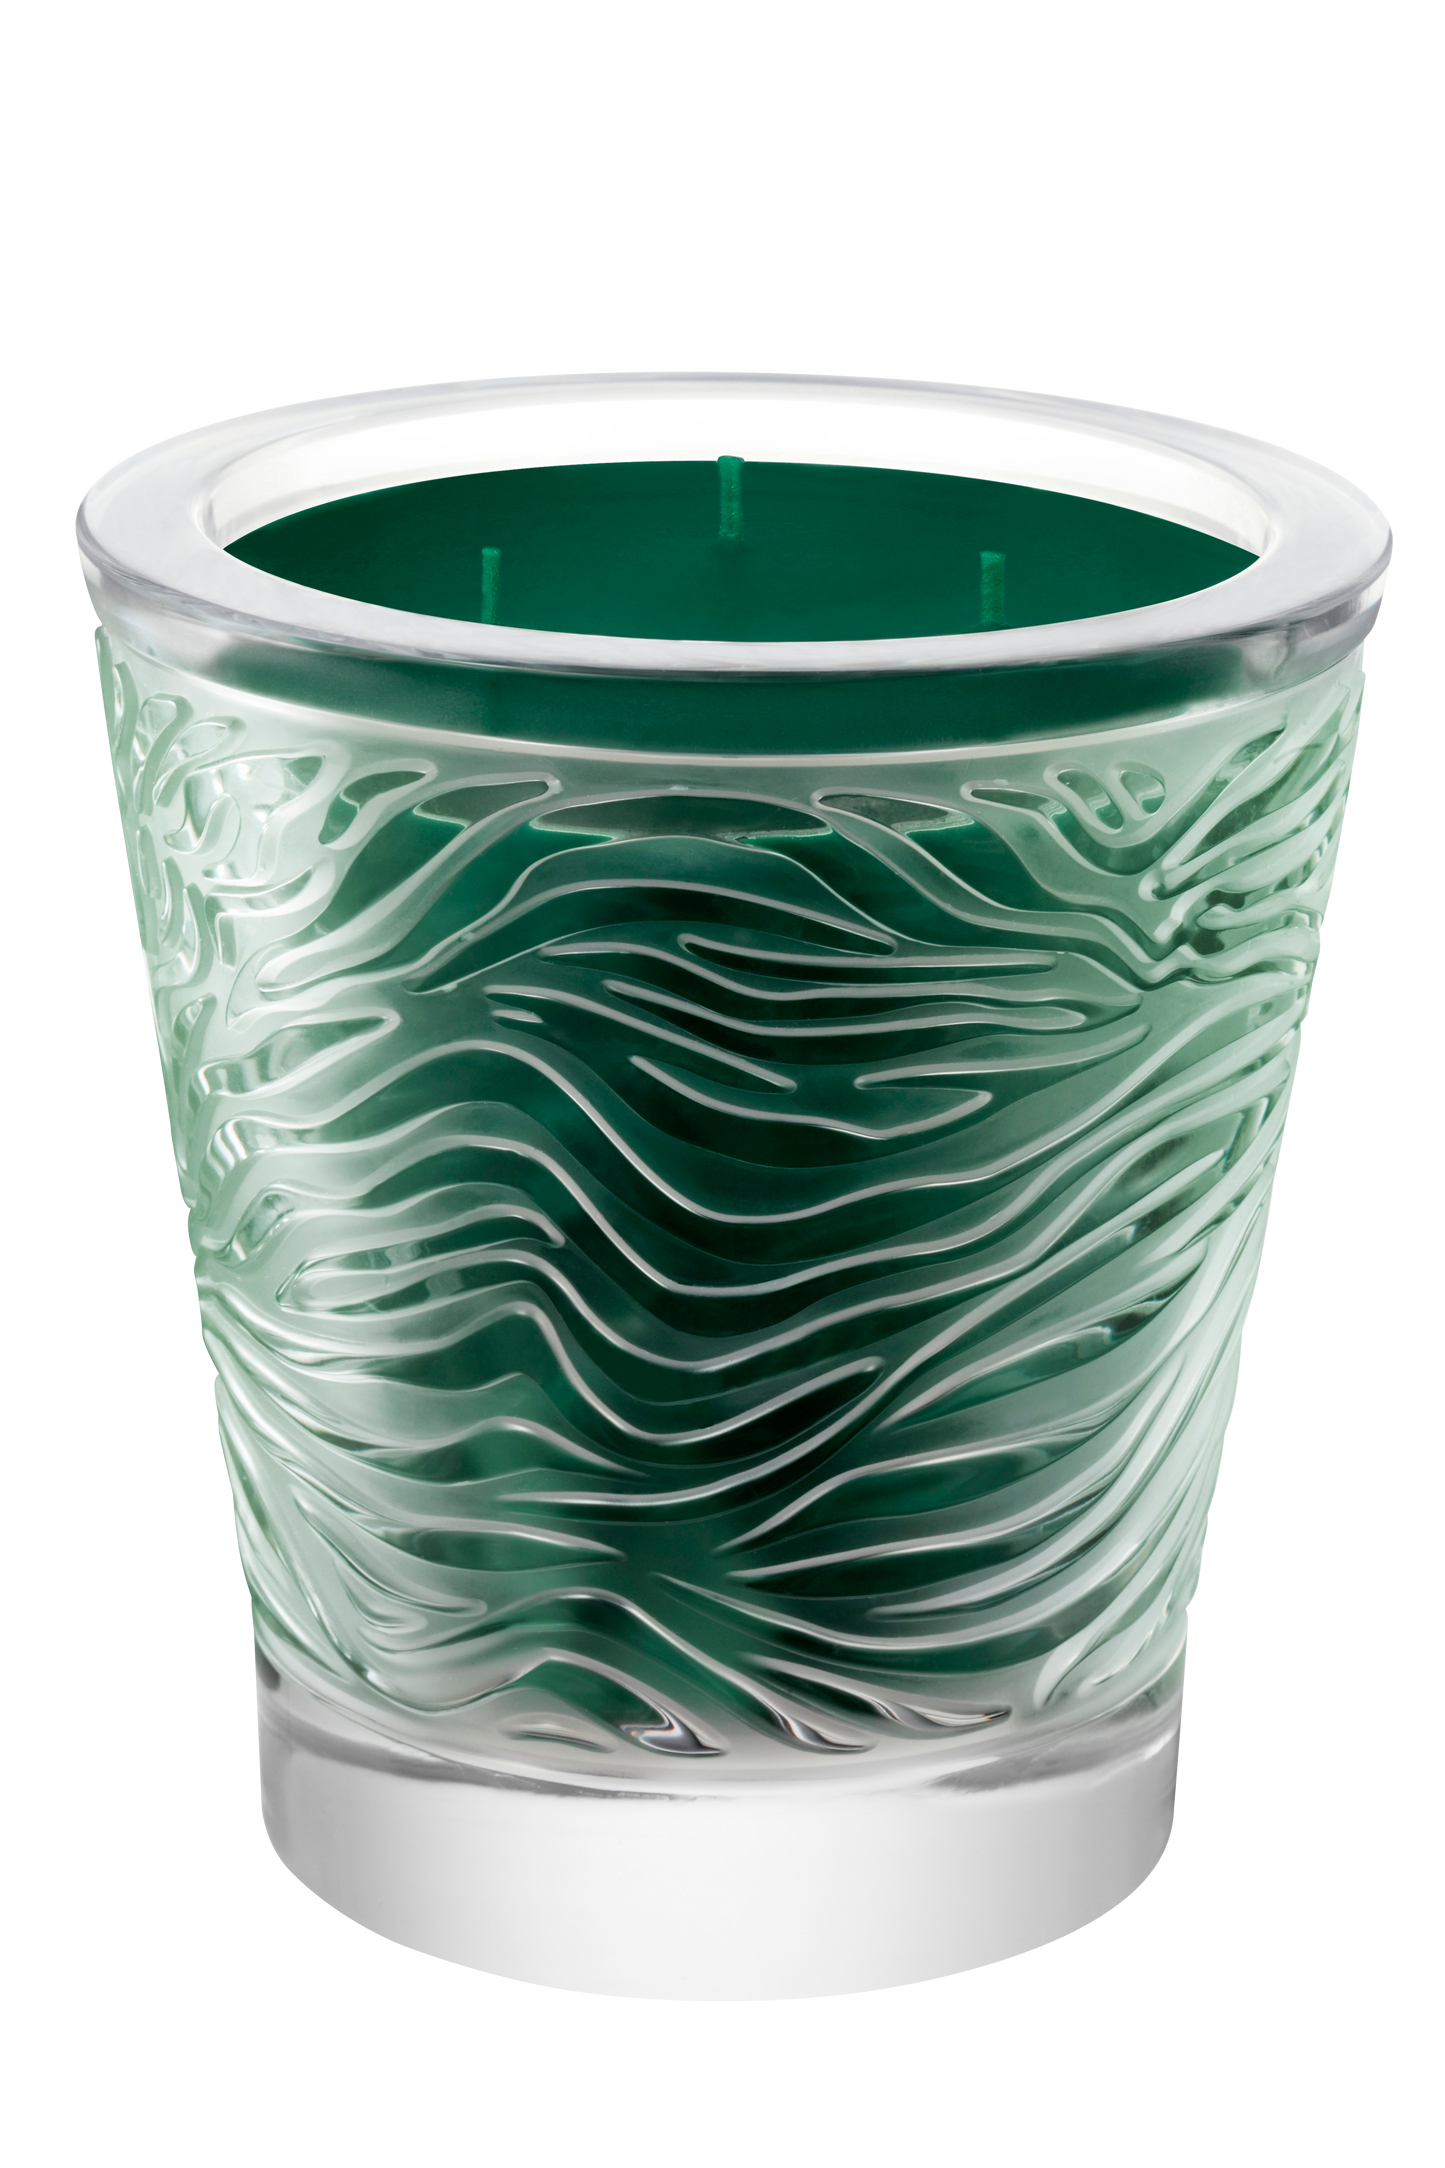 Taïga Crystal Scented Candle